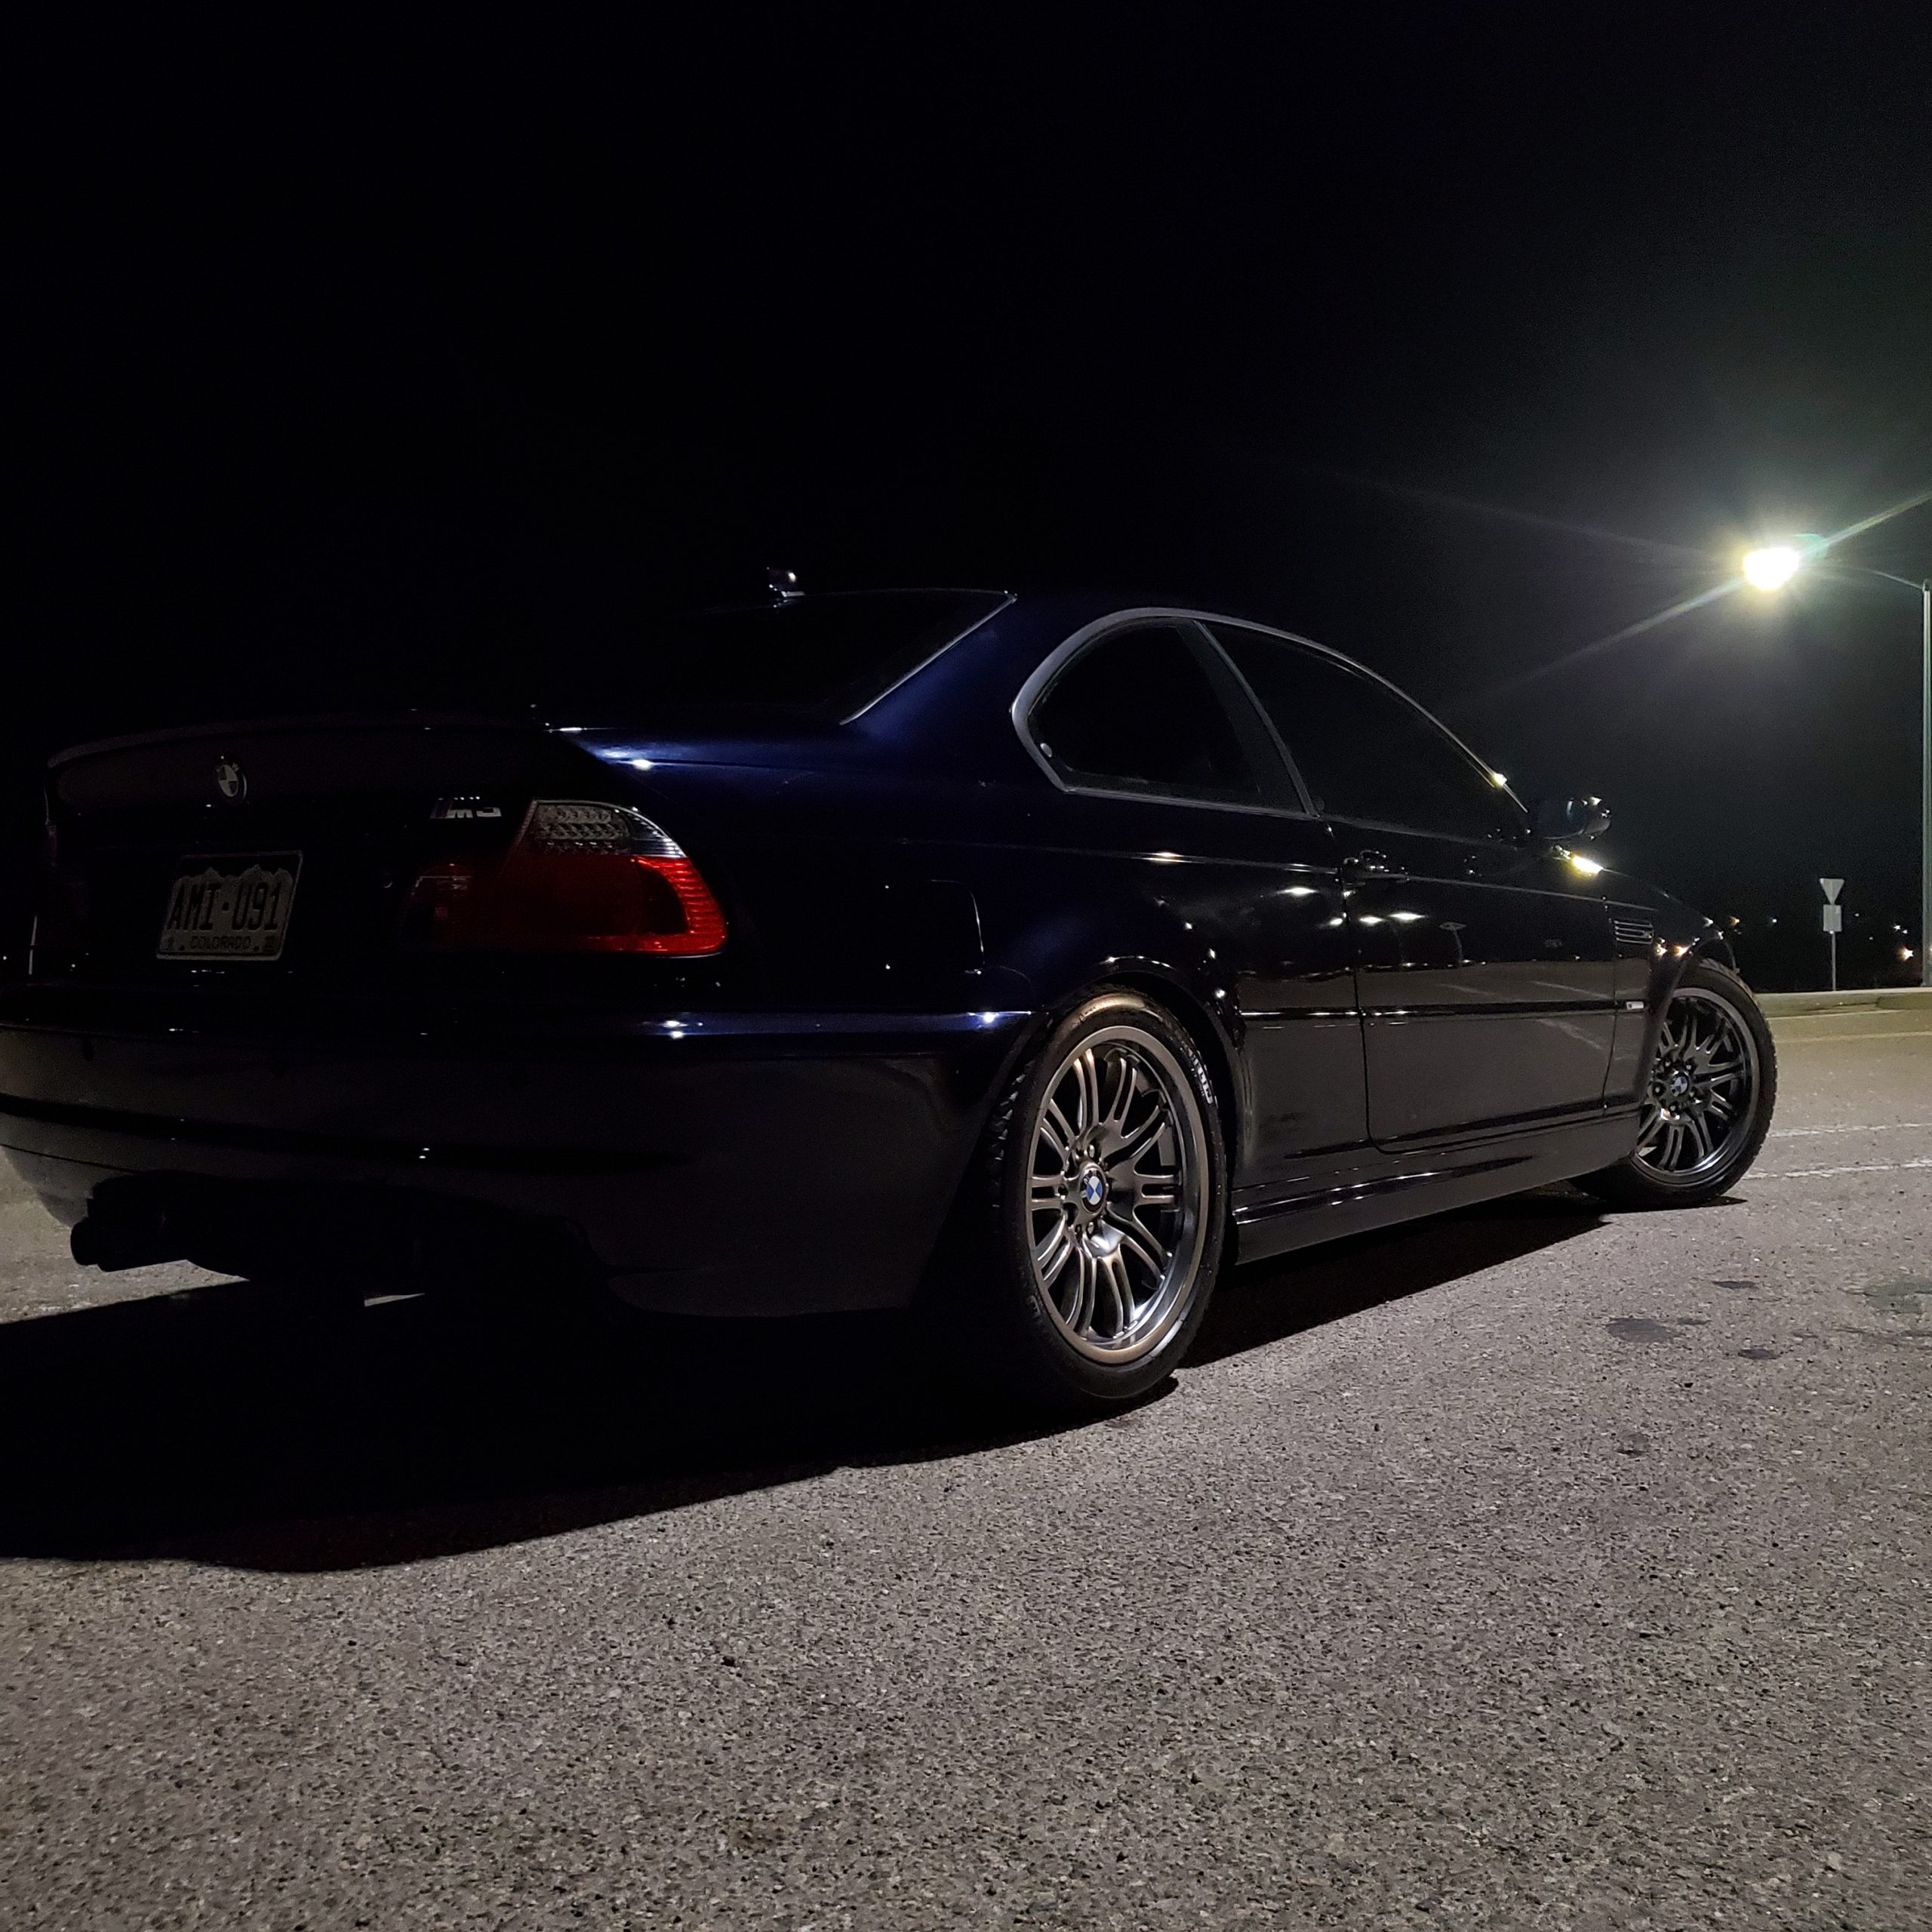 A black E46 BMW M3 shot from the rear 3/4 under a street lamp at night